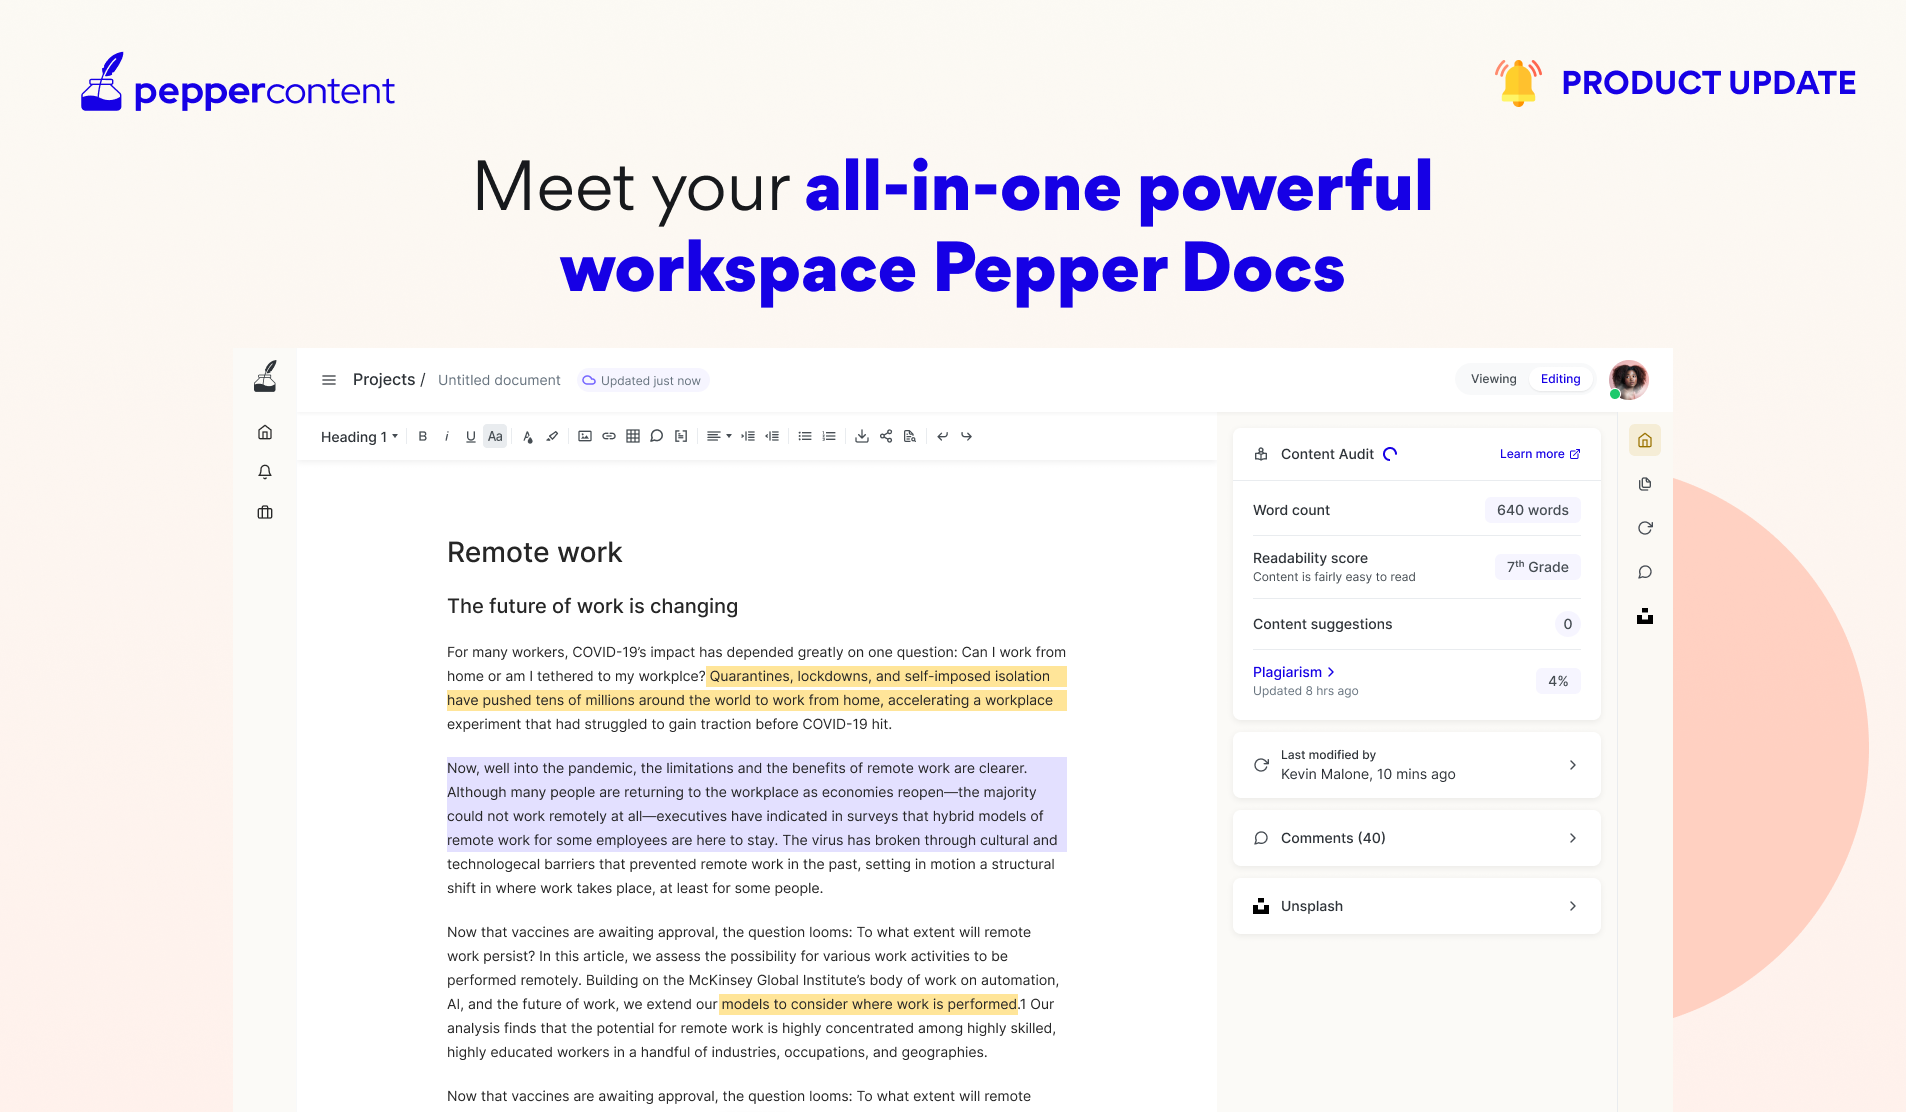 Meet your all-in-one workspace: Pepper Docs